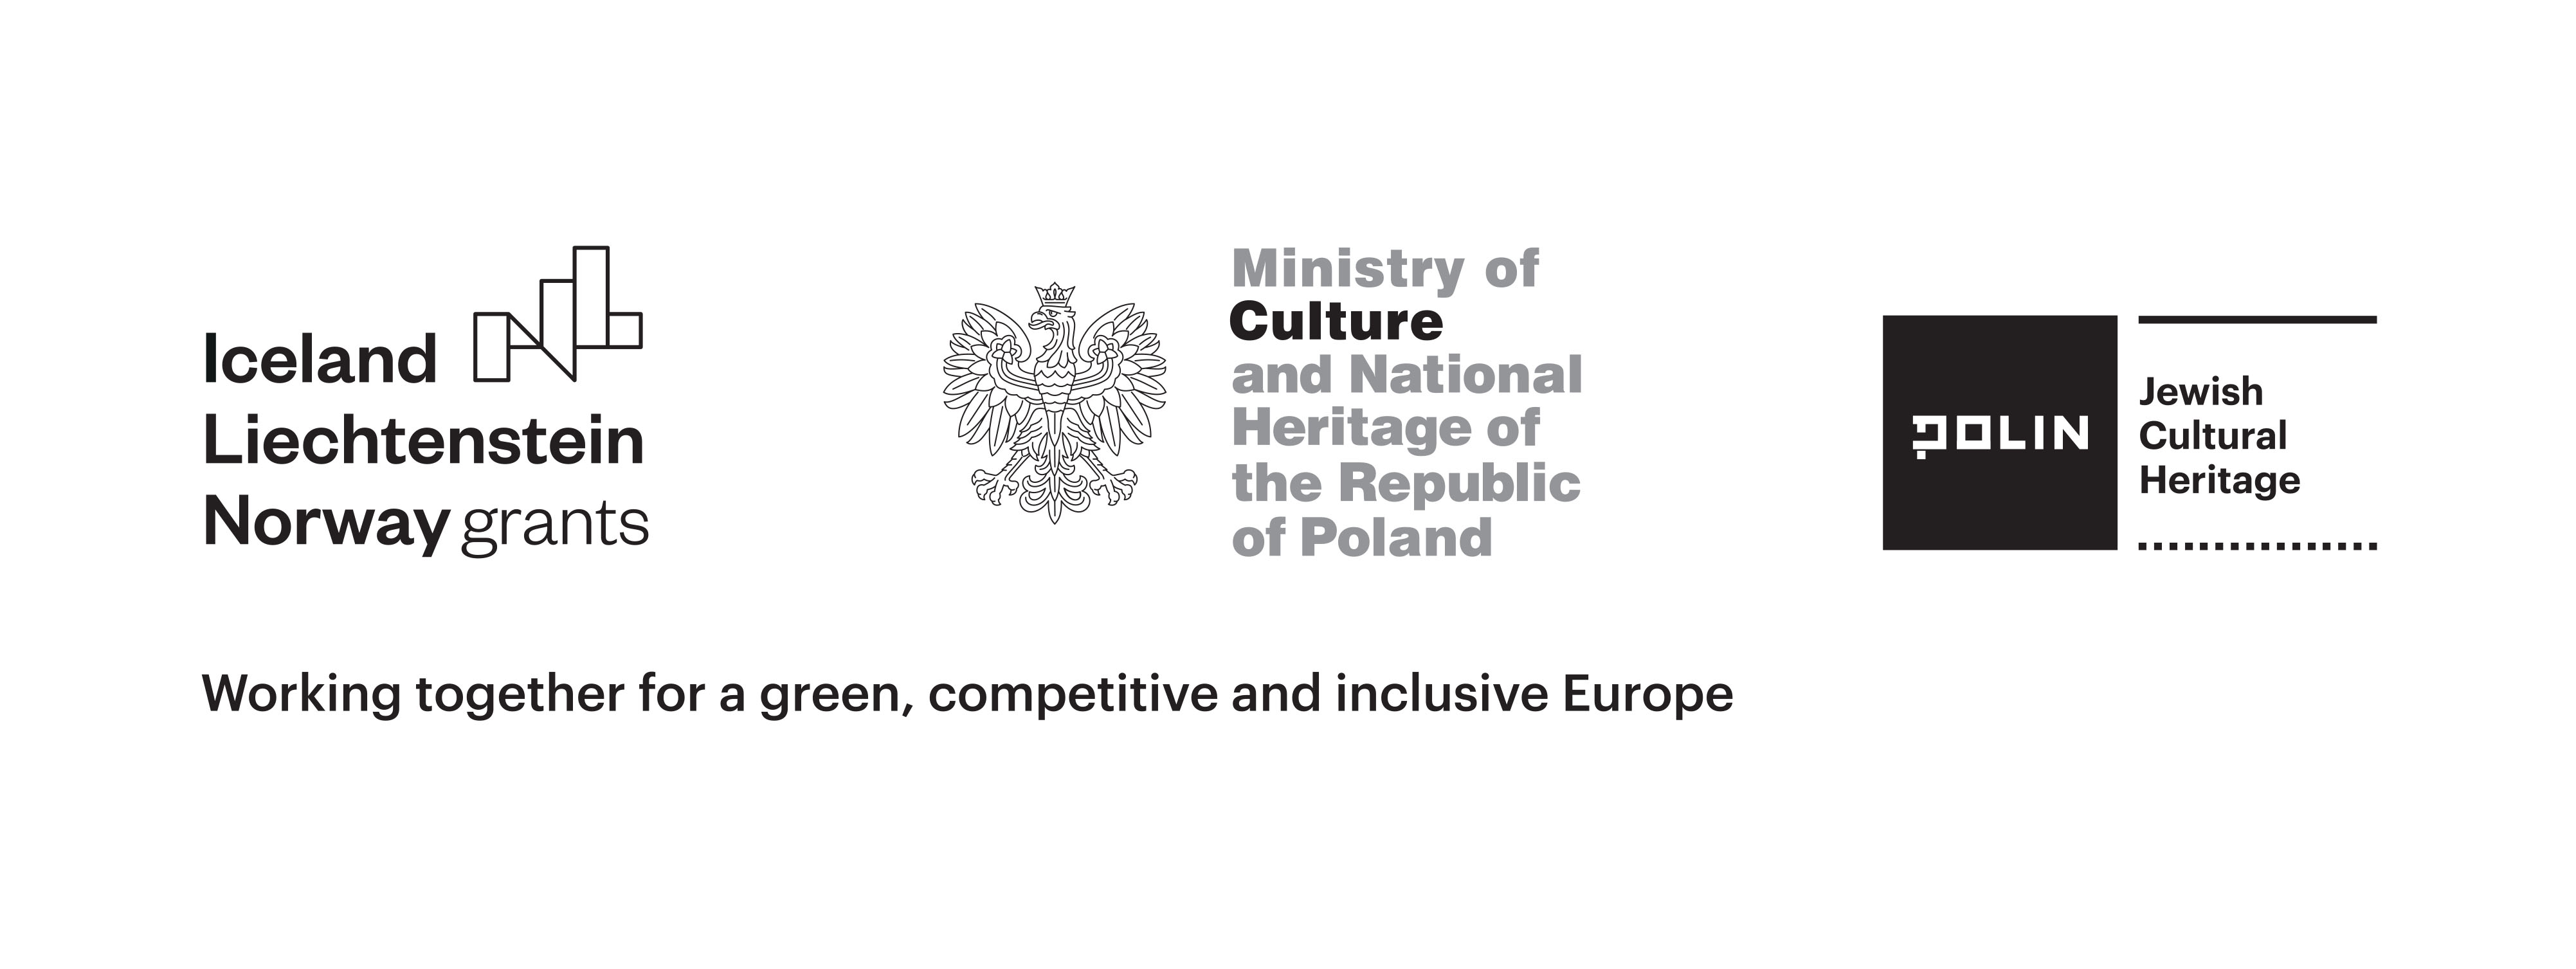 Logo of Jewish Cultural Heritage Project: from right side: logo of Norway grants, logo of Ministry of Culture and National Heritage of Republic of Poland, logo Polin Museum and JCK project. Below sentence: Working together for green, competetive and inclusive Europe.